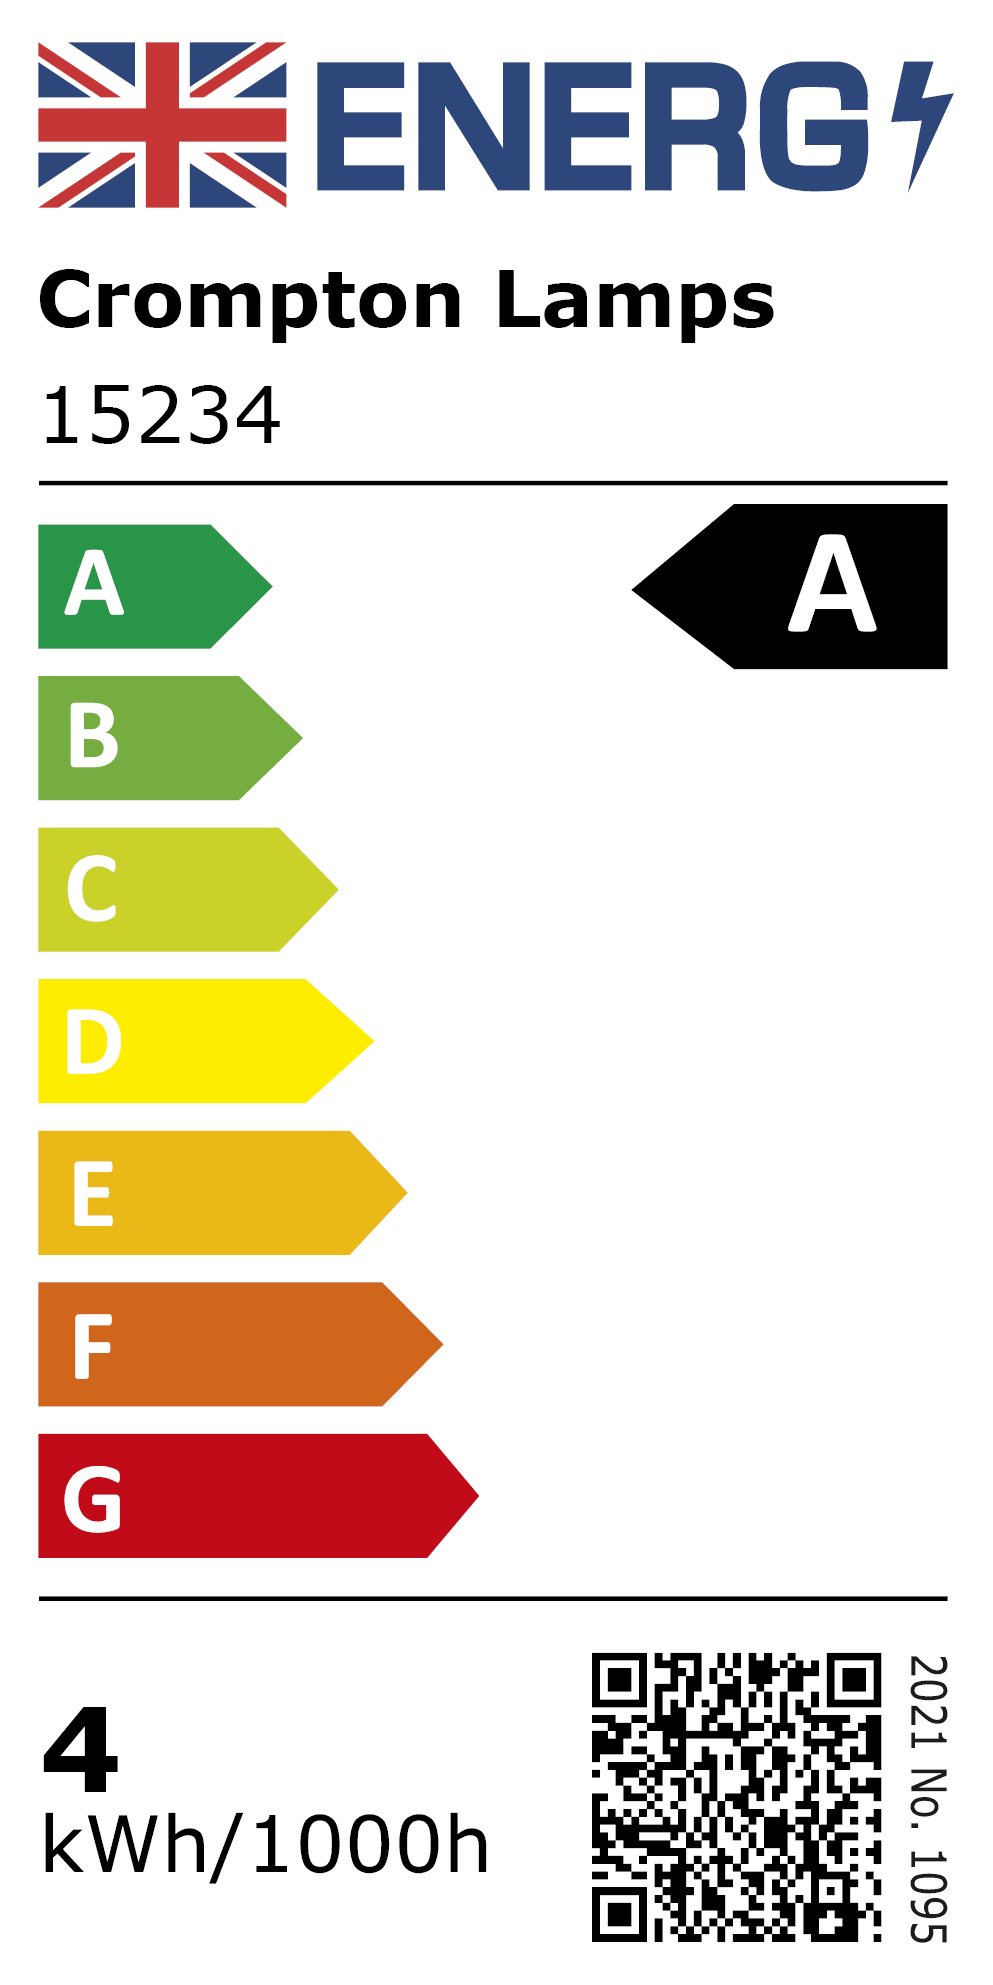 New 2021 Energy Rating Label: Stock Code 15234